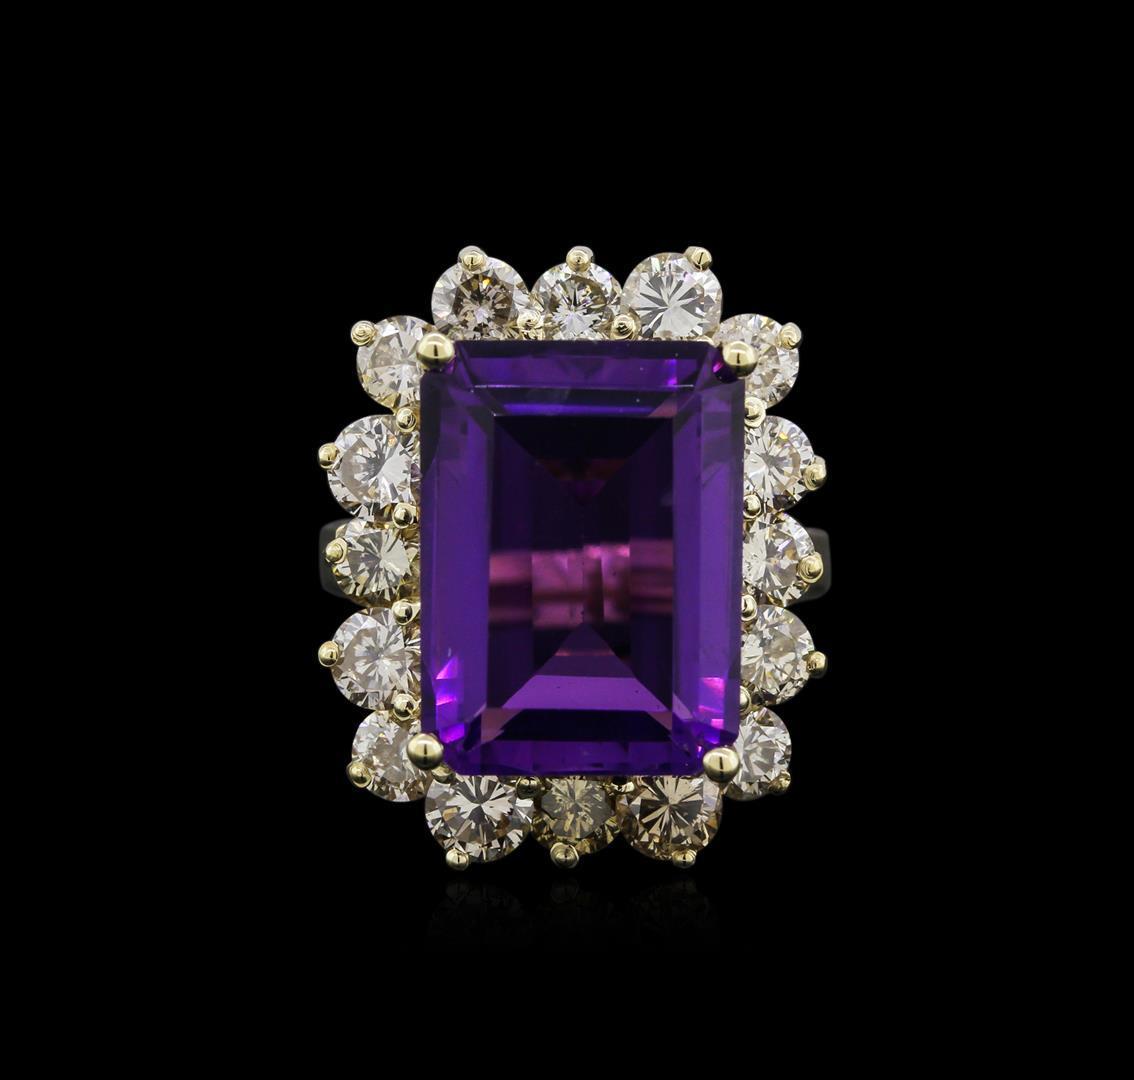 14KT Yellow Gold 10.53 ctw Amethyst and Diamond Ring